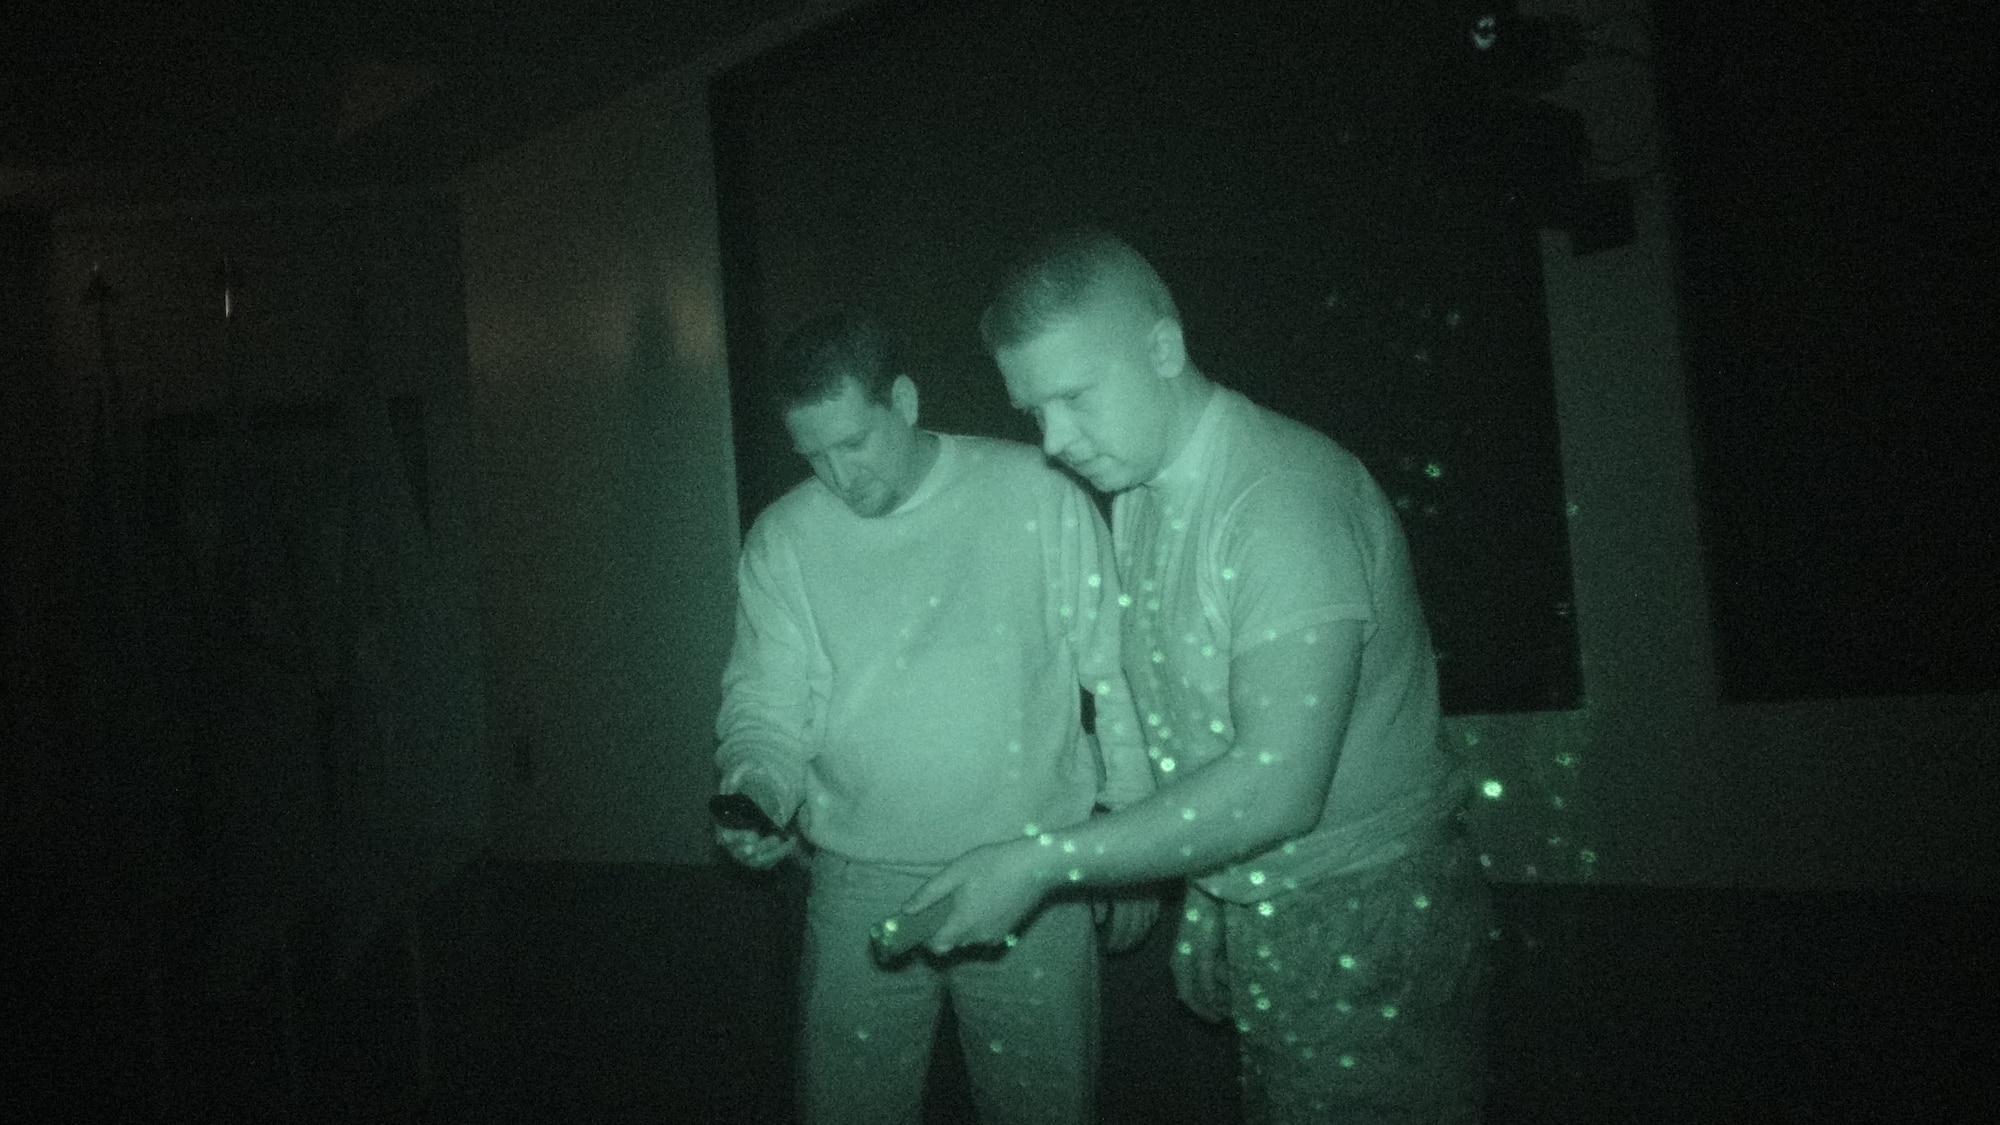 Josh Burger and Stan Maczek demonstrate the use of an electro-magnetic field detector through the lense of a video camera equipped with an infrared attachment. Burger and Maczek use both instruments during their paranormal investigations. (U.S. Air Force photo\Scott Prater).